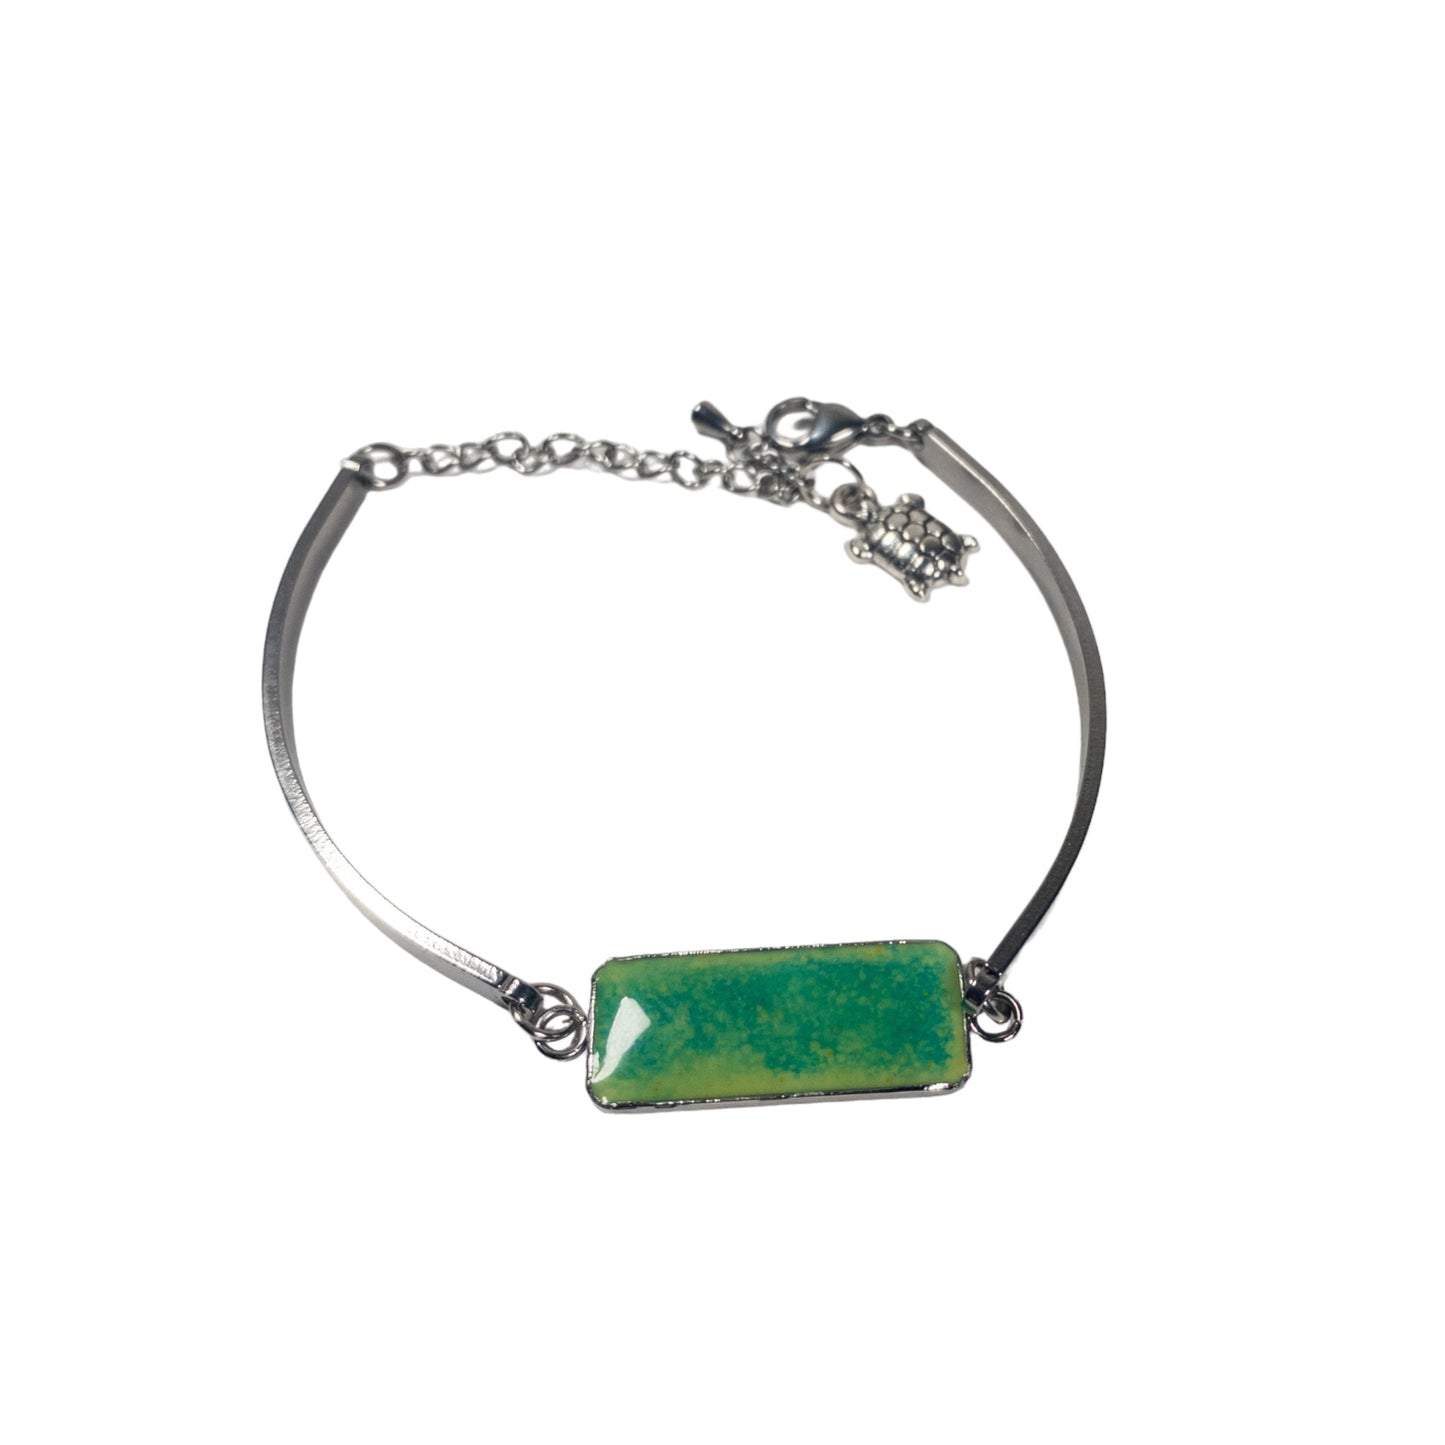 Stainless Steel Green Chameleon Cement Inlay Bracelet w/Charm